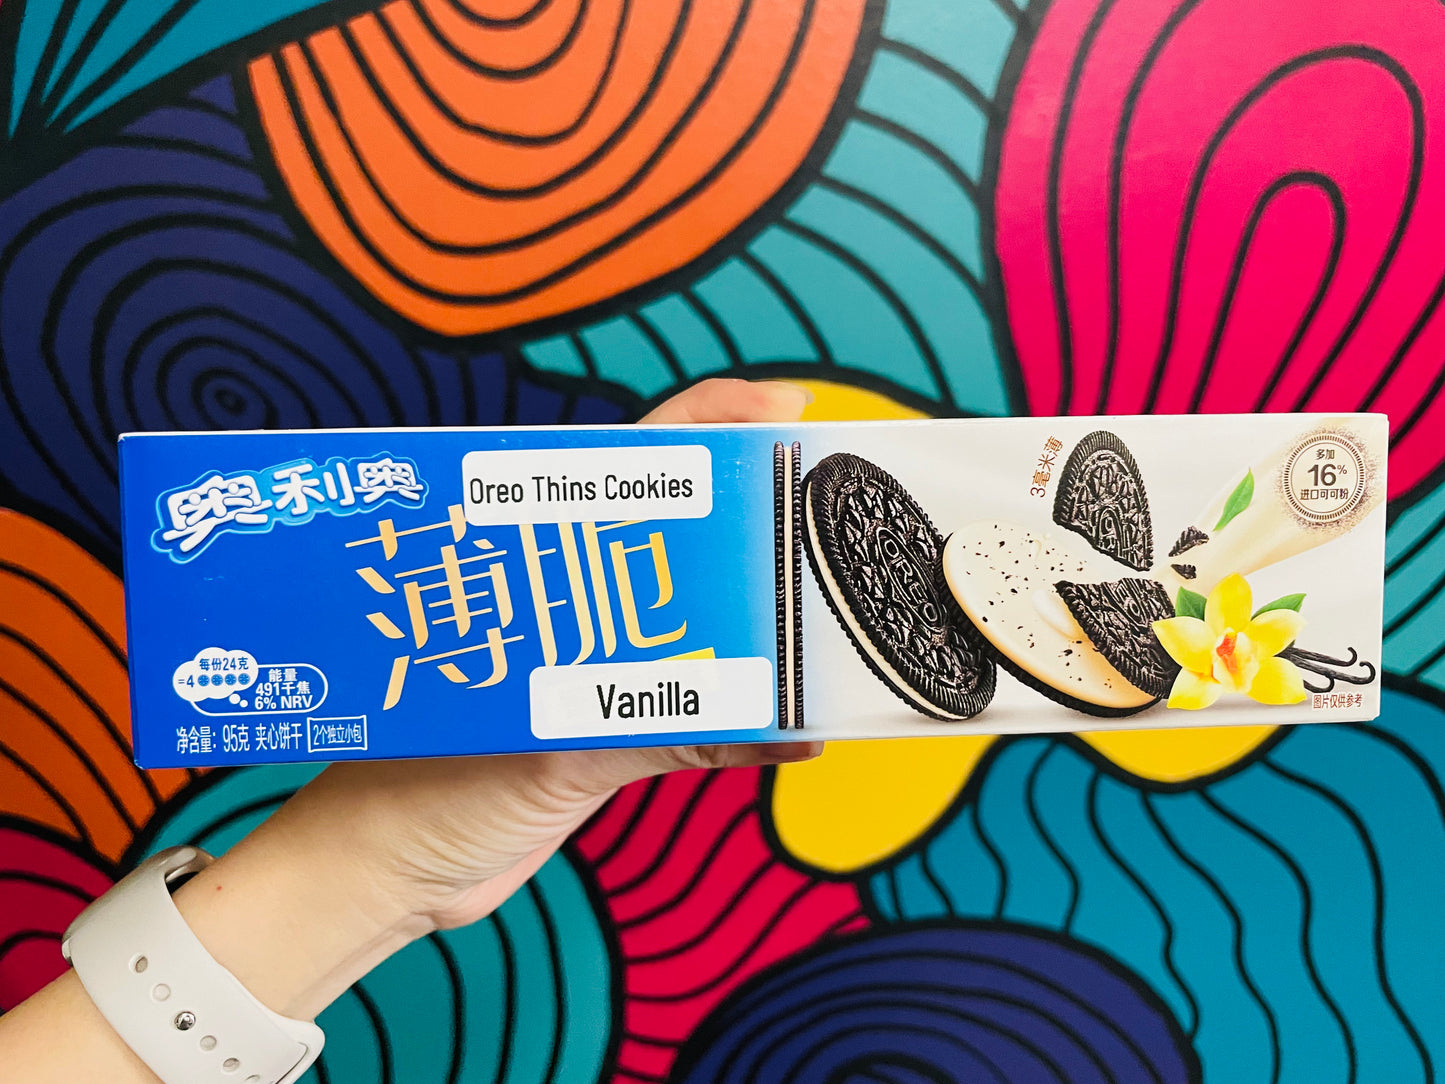 Oreo Thins Cookies - Exotic Snack